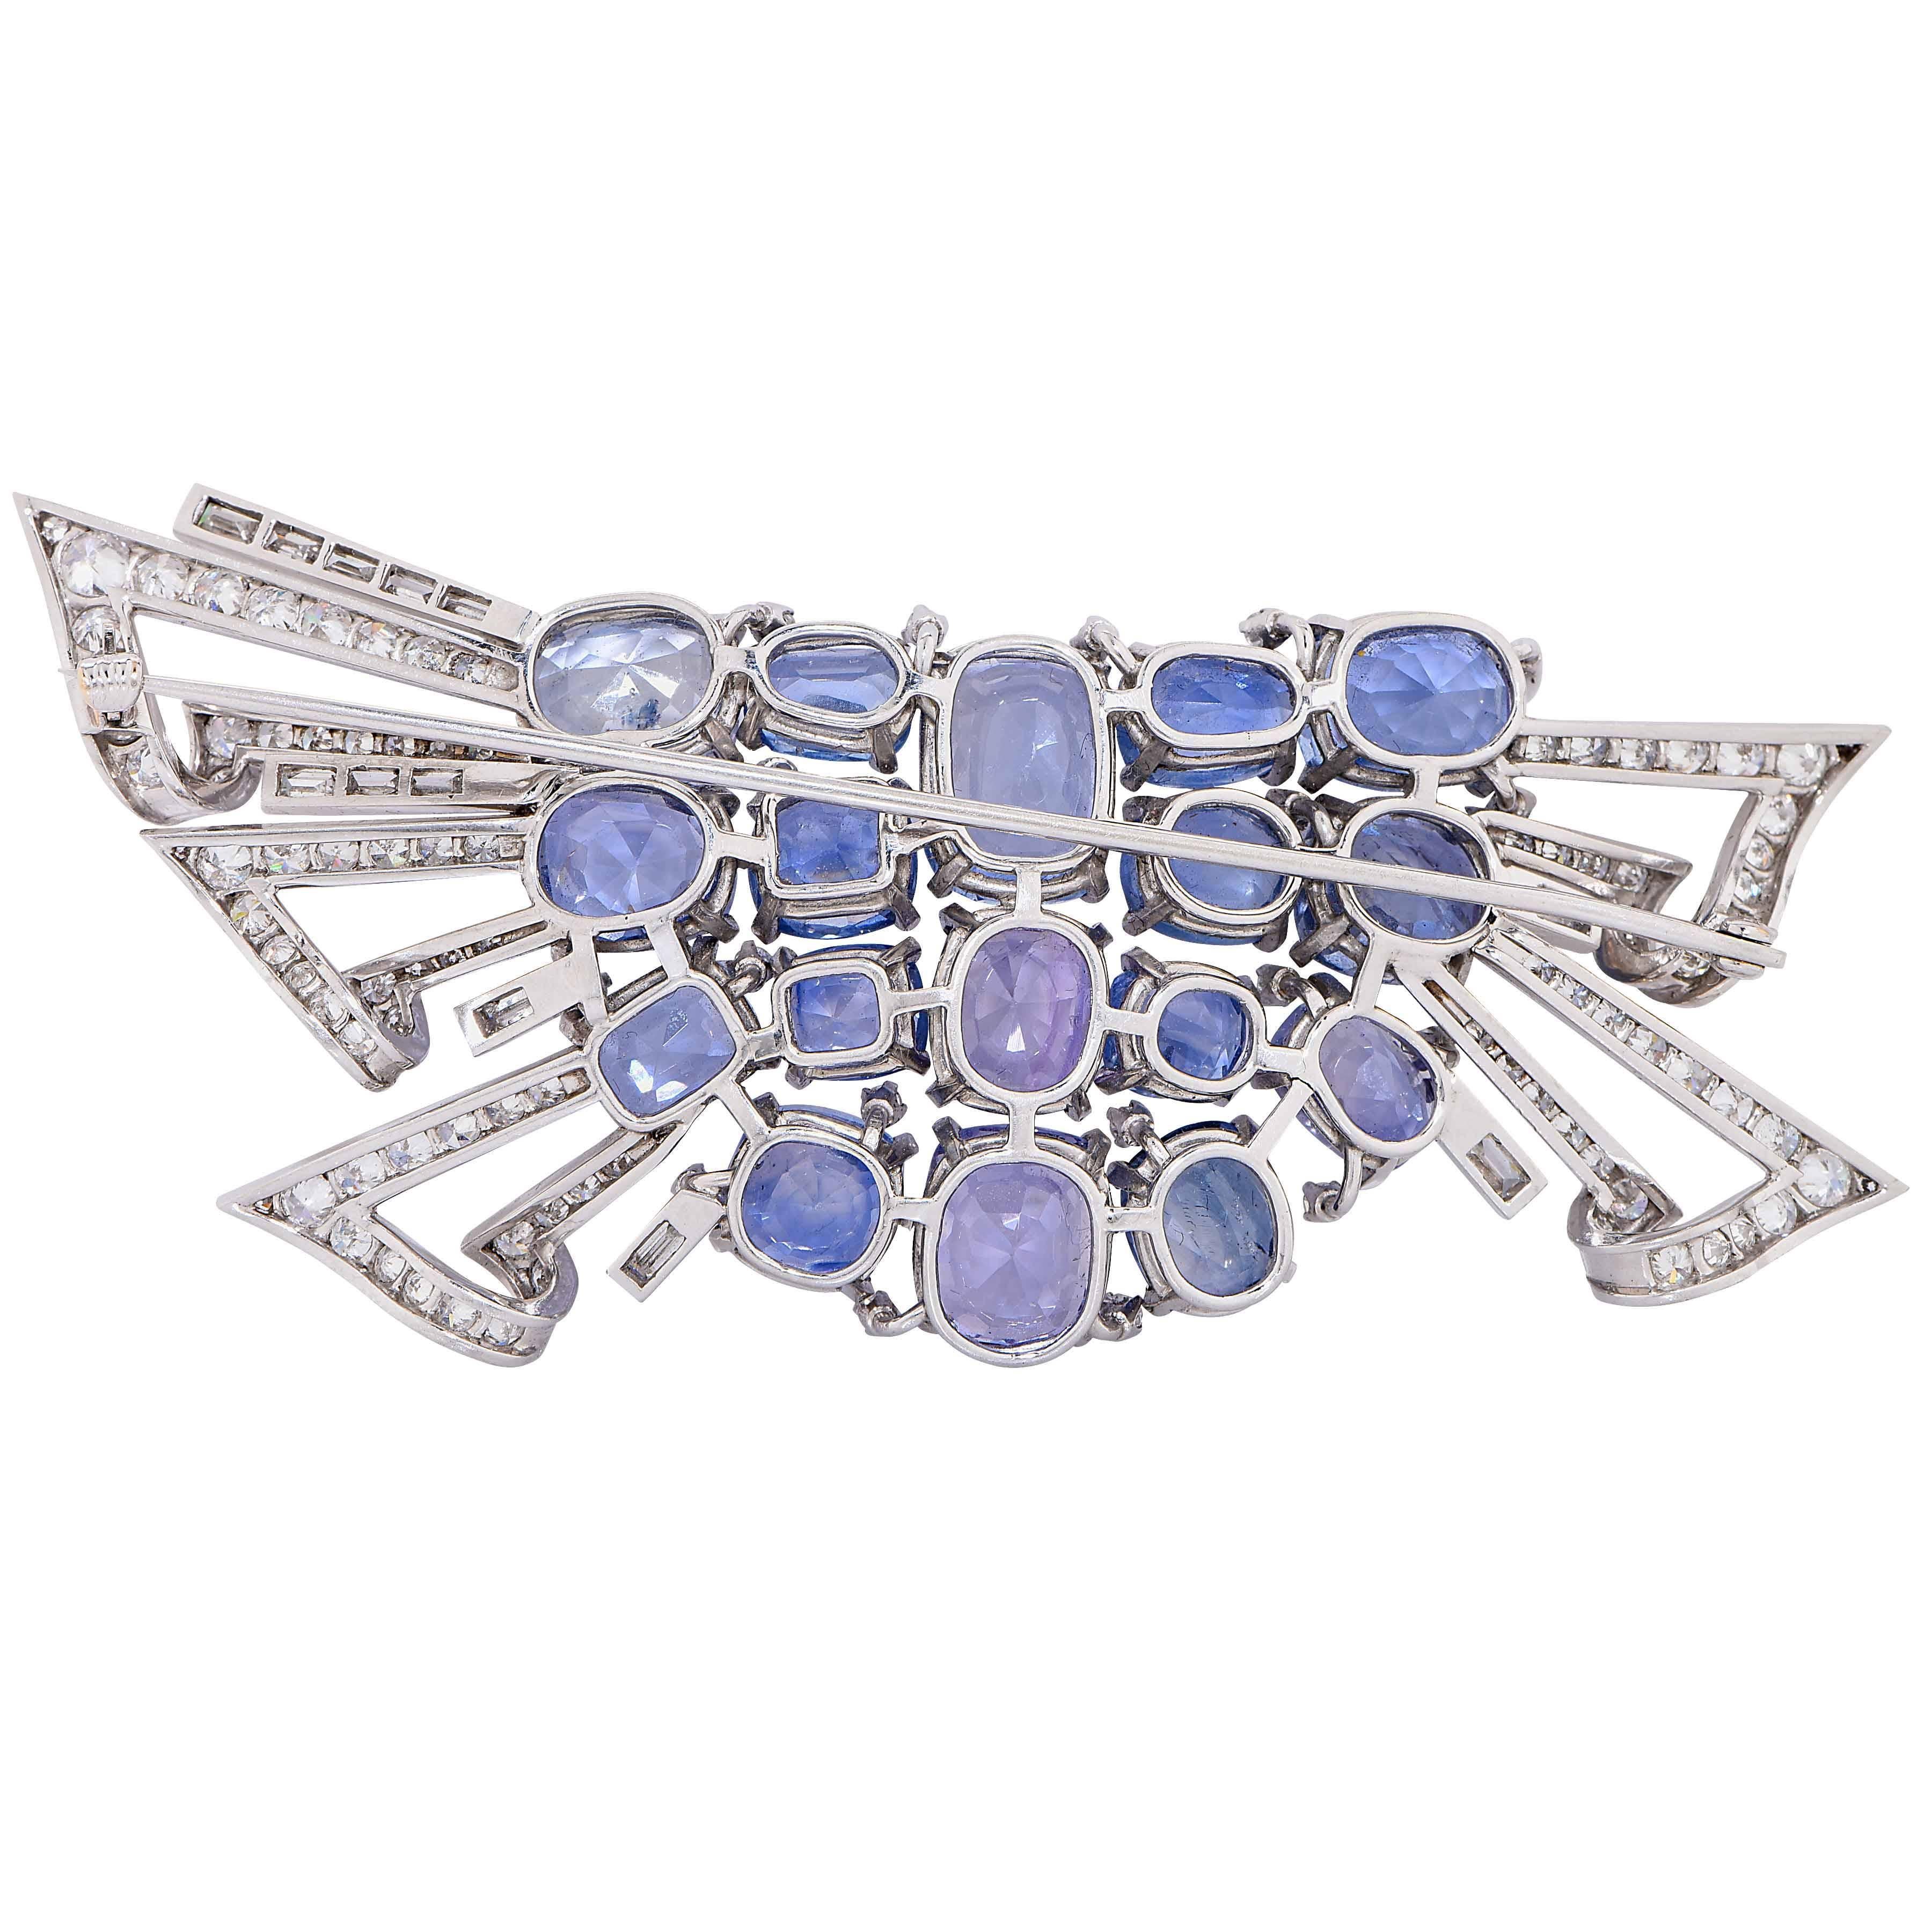 Mid Century Design Blue and Purple Sapphire and Diamond Platinum Brooch featuring 17 cushion and oval cut blue and purple natural sapphires with an estimated total weight of 50 carats and round cut diamonds with an estimated total weight of 5 carats